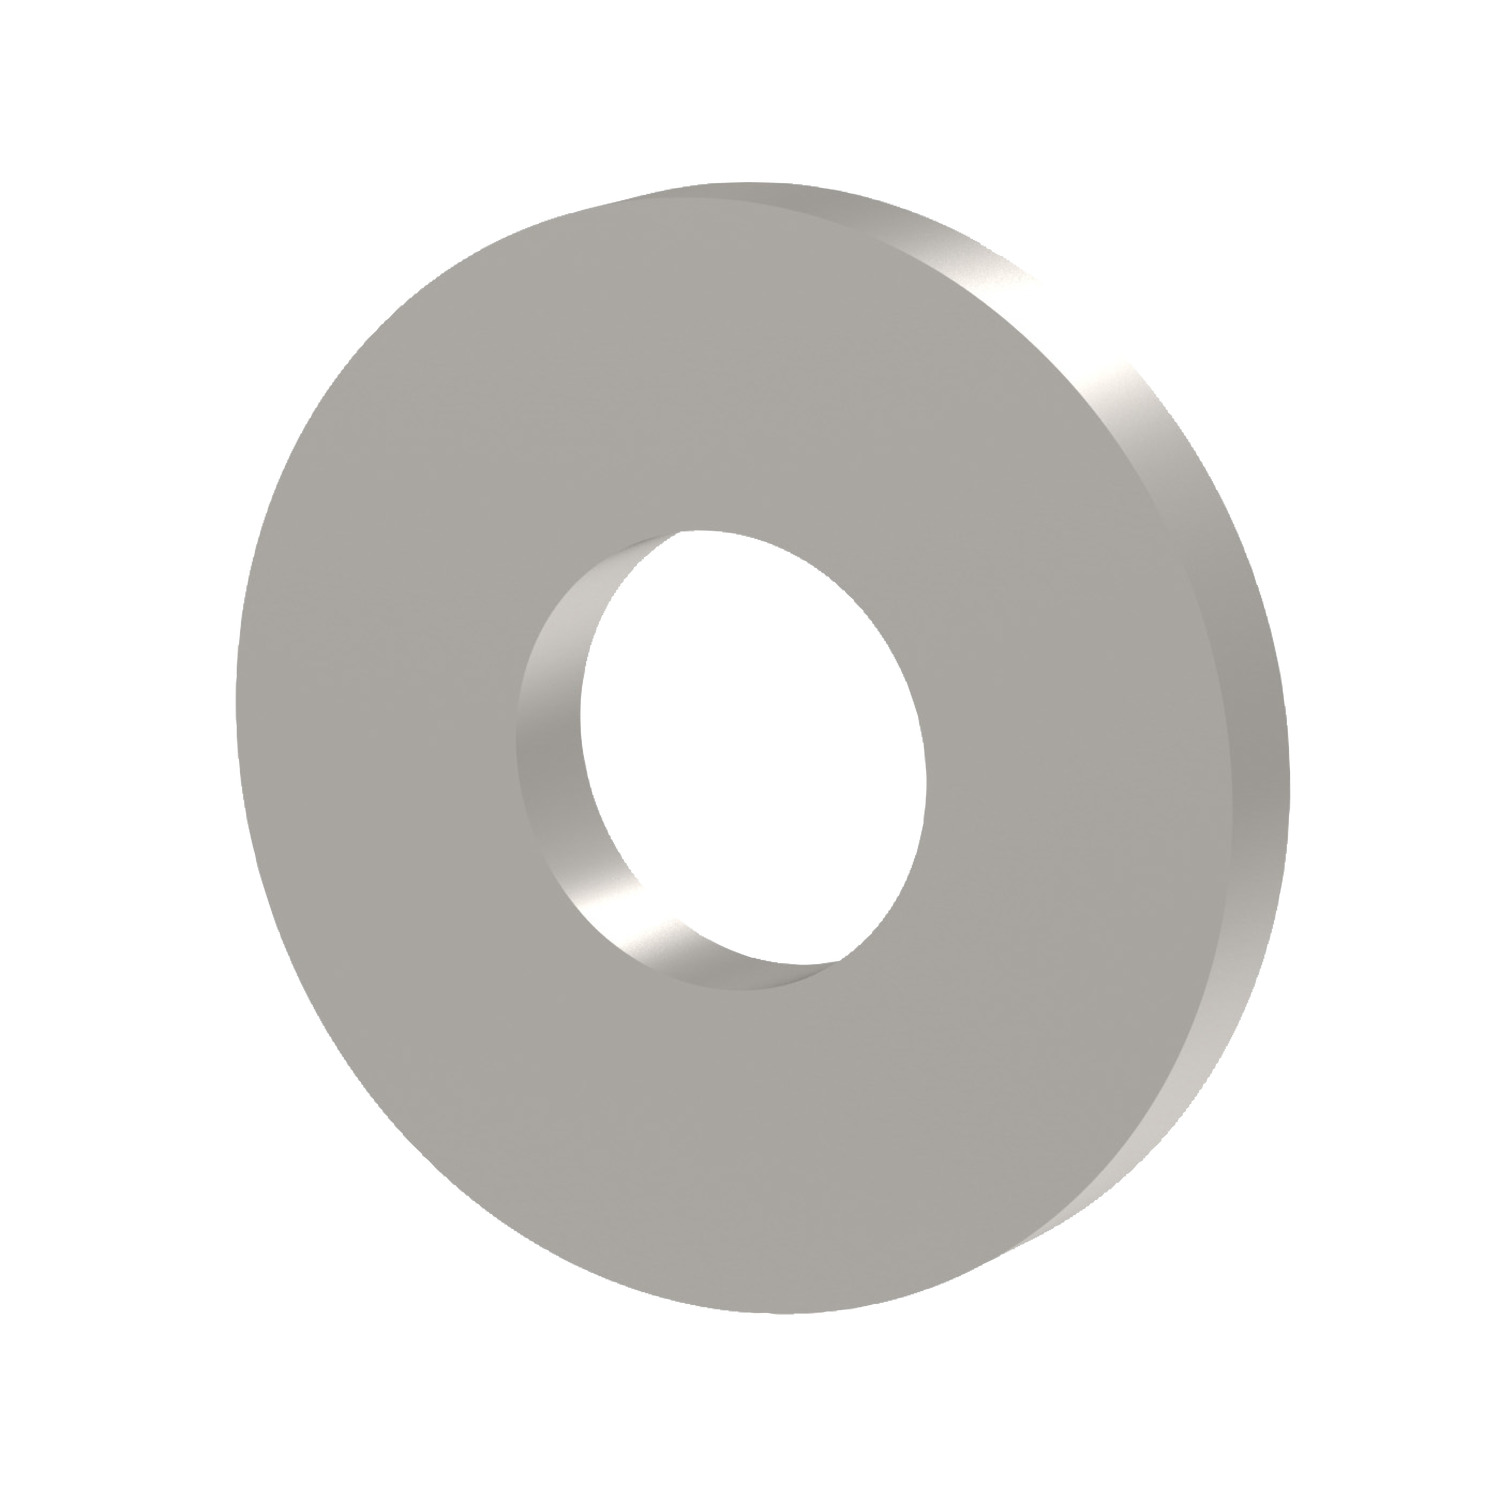 Flat Washers Form A Stainless steel (A2) washers for use with our clevis joints. Stainless steel cotter pins and clevis pins are also available for a corrosion resistant assembly.